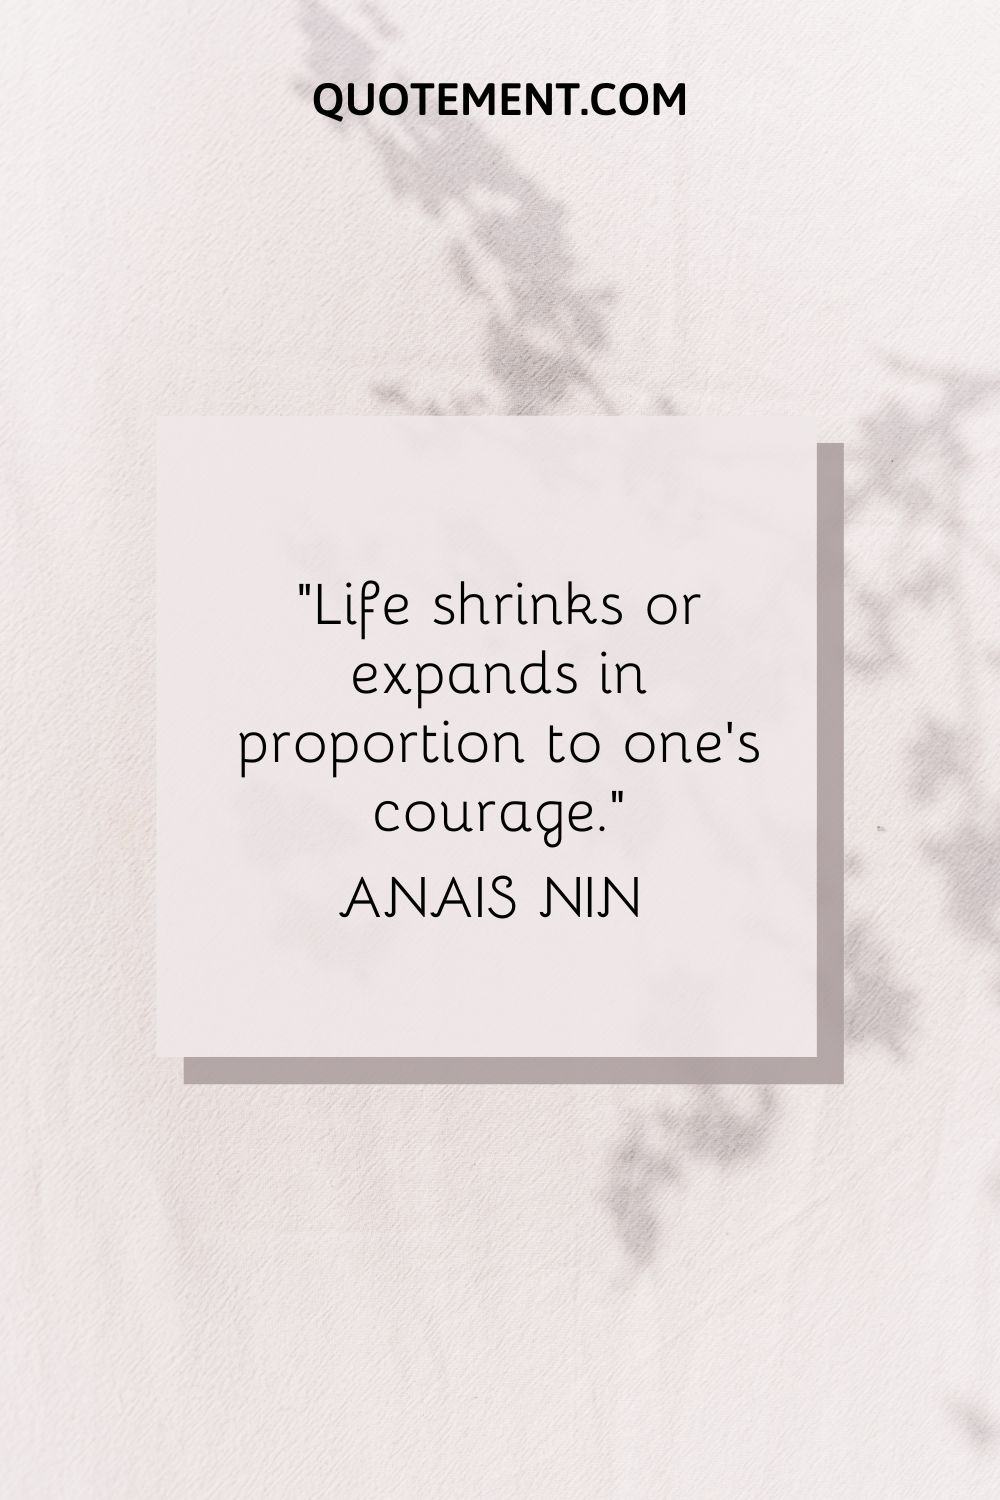 “Life shrinks or expands in proportion to one's courage.” ― Anais Nin